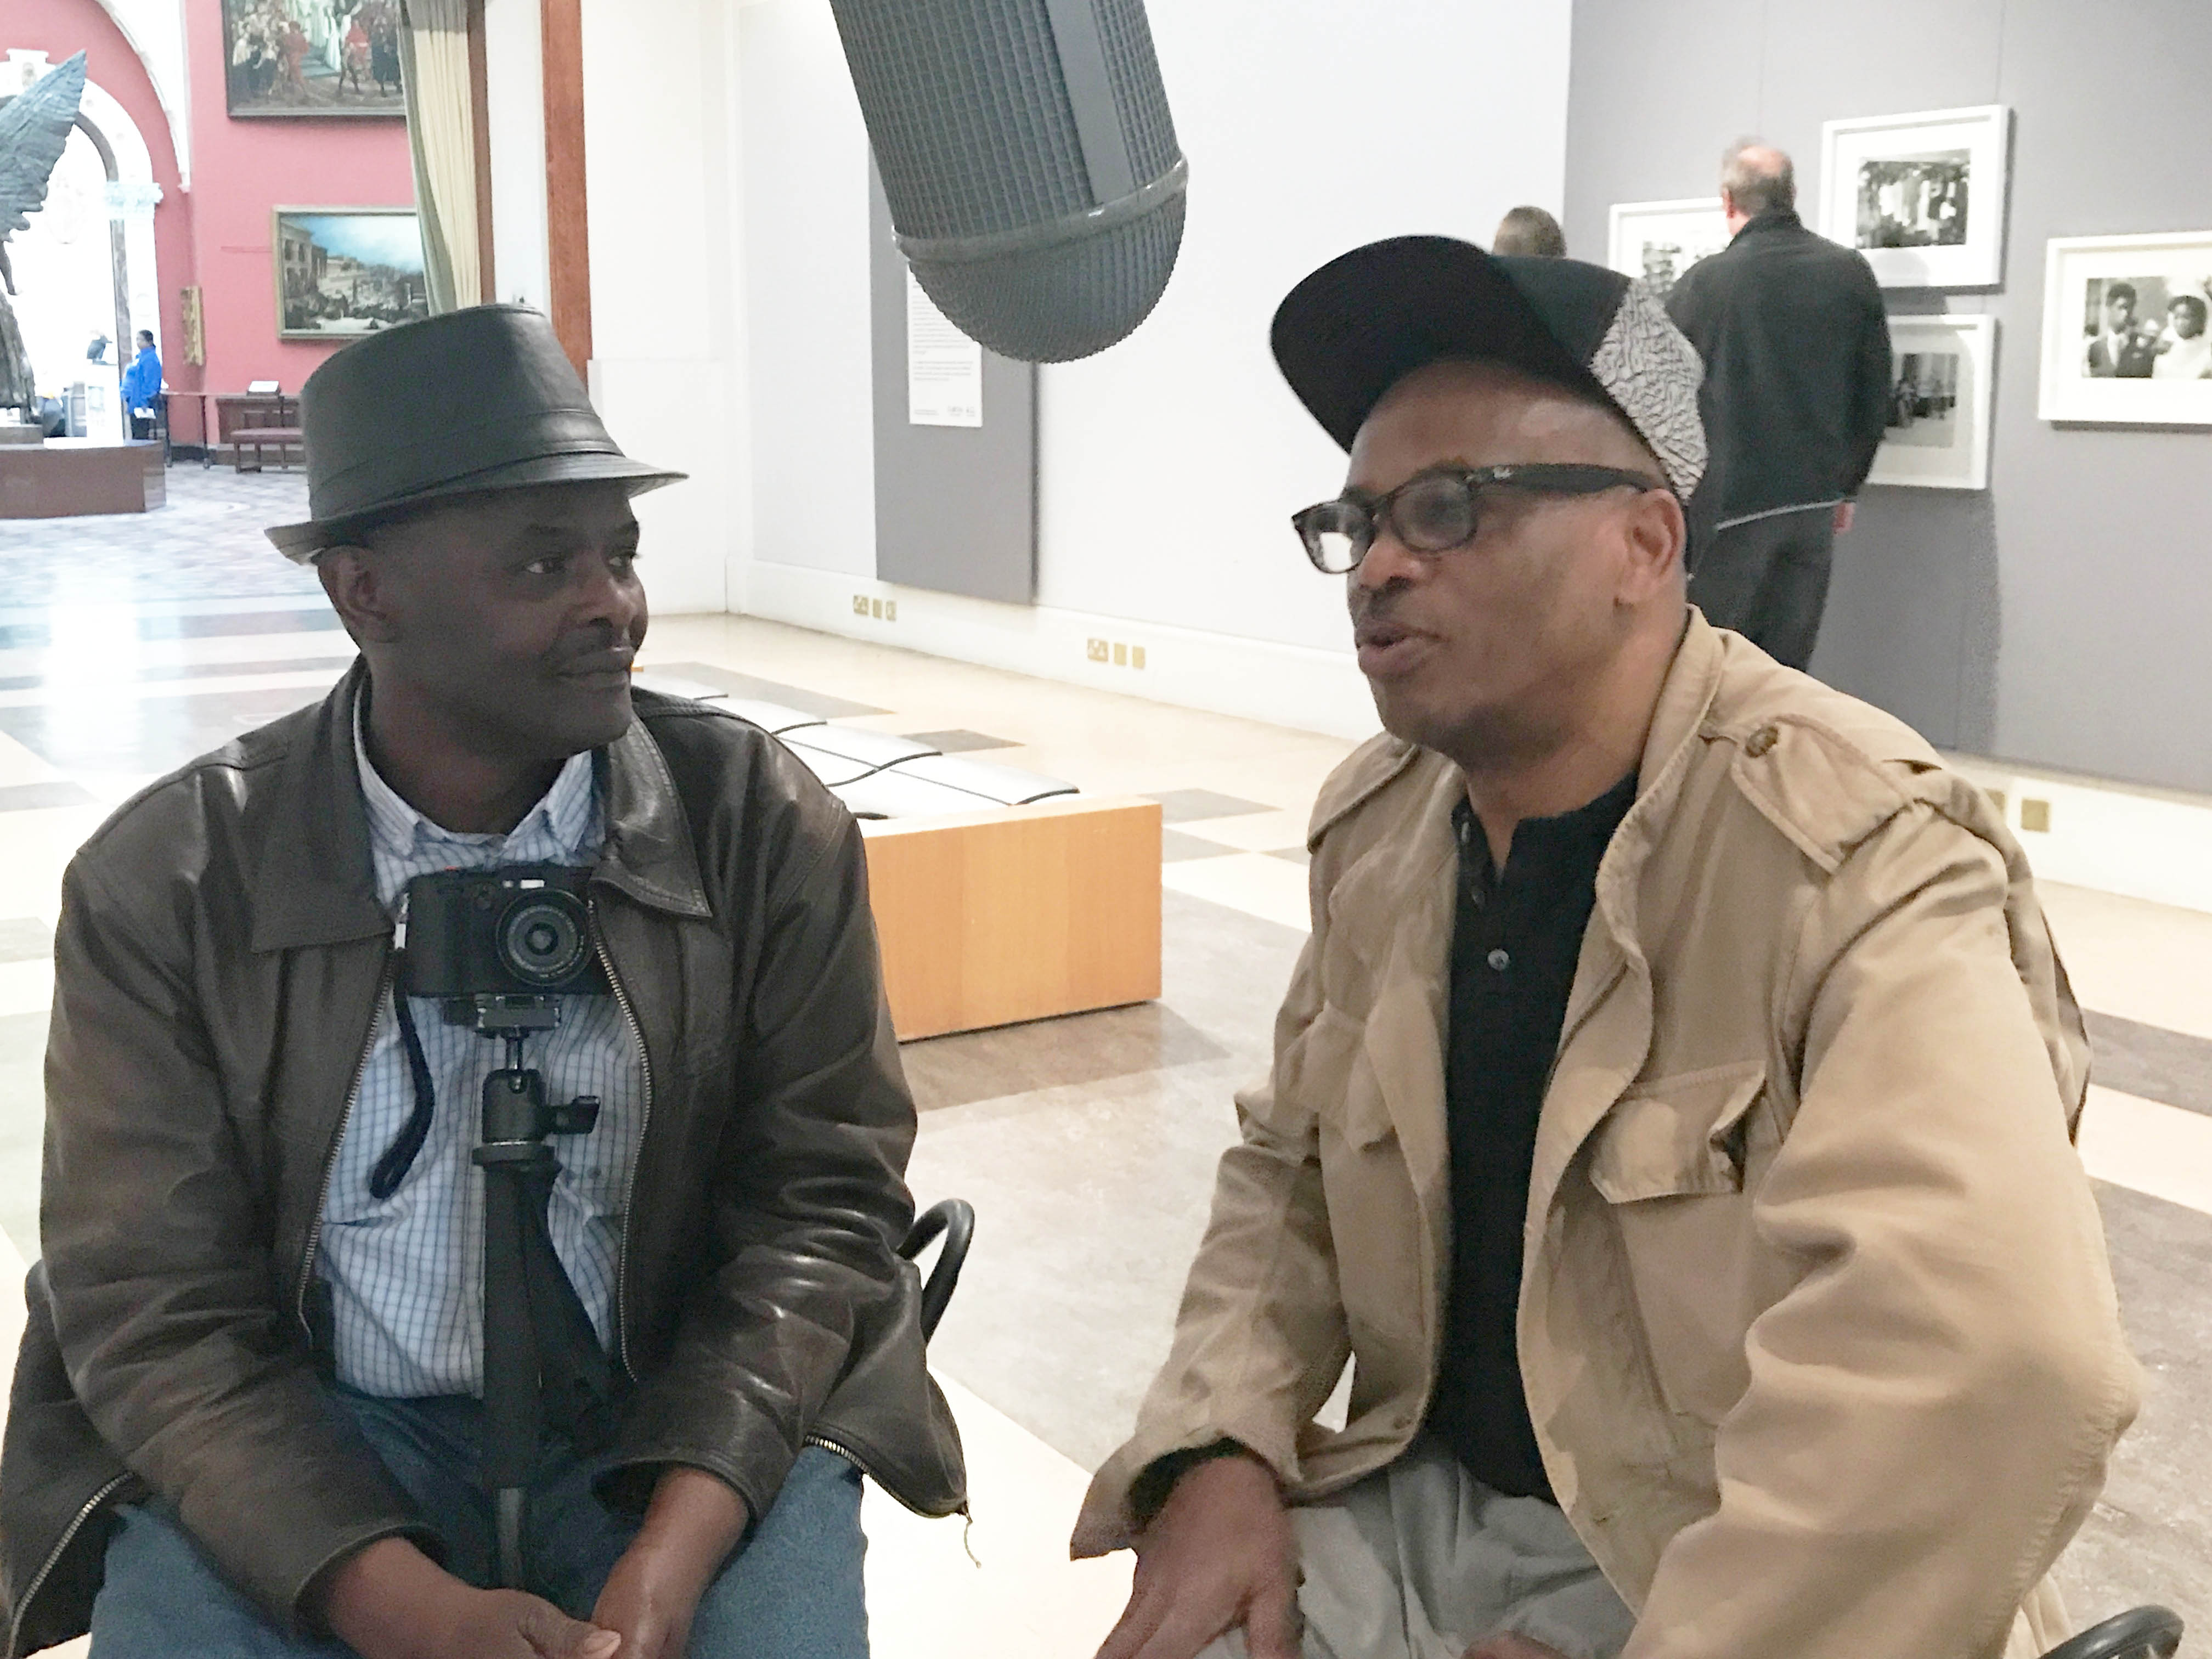 This was the first time Norville Bynoe (right) with the photographer Vanley Burke. This was the first time Norville had seen the photograph in which he features